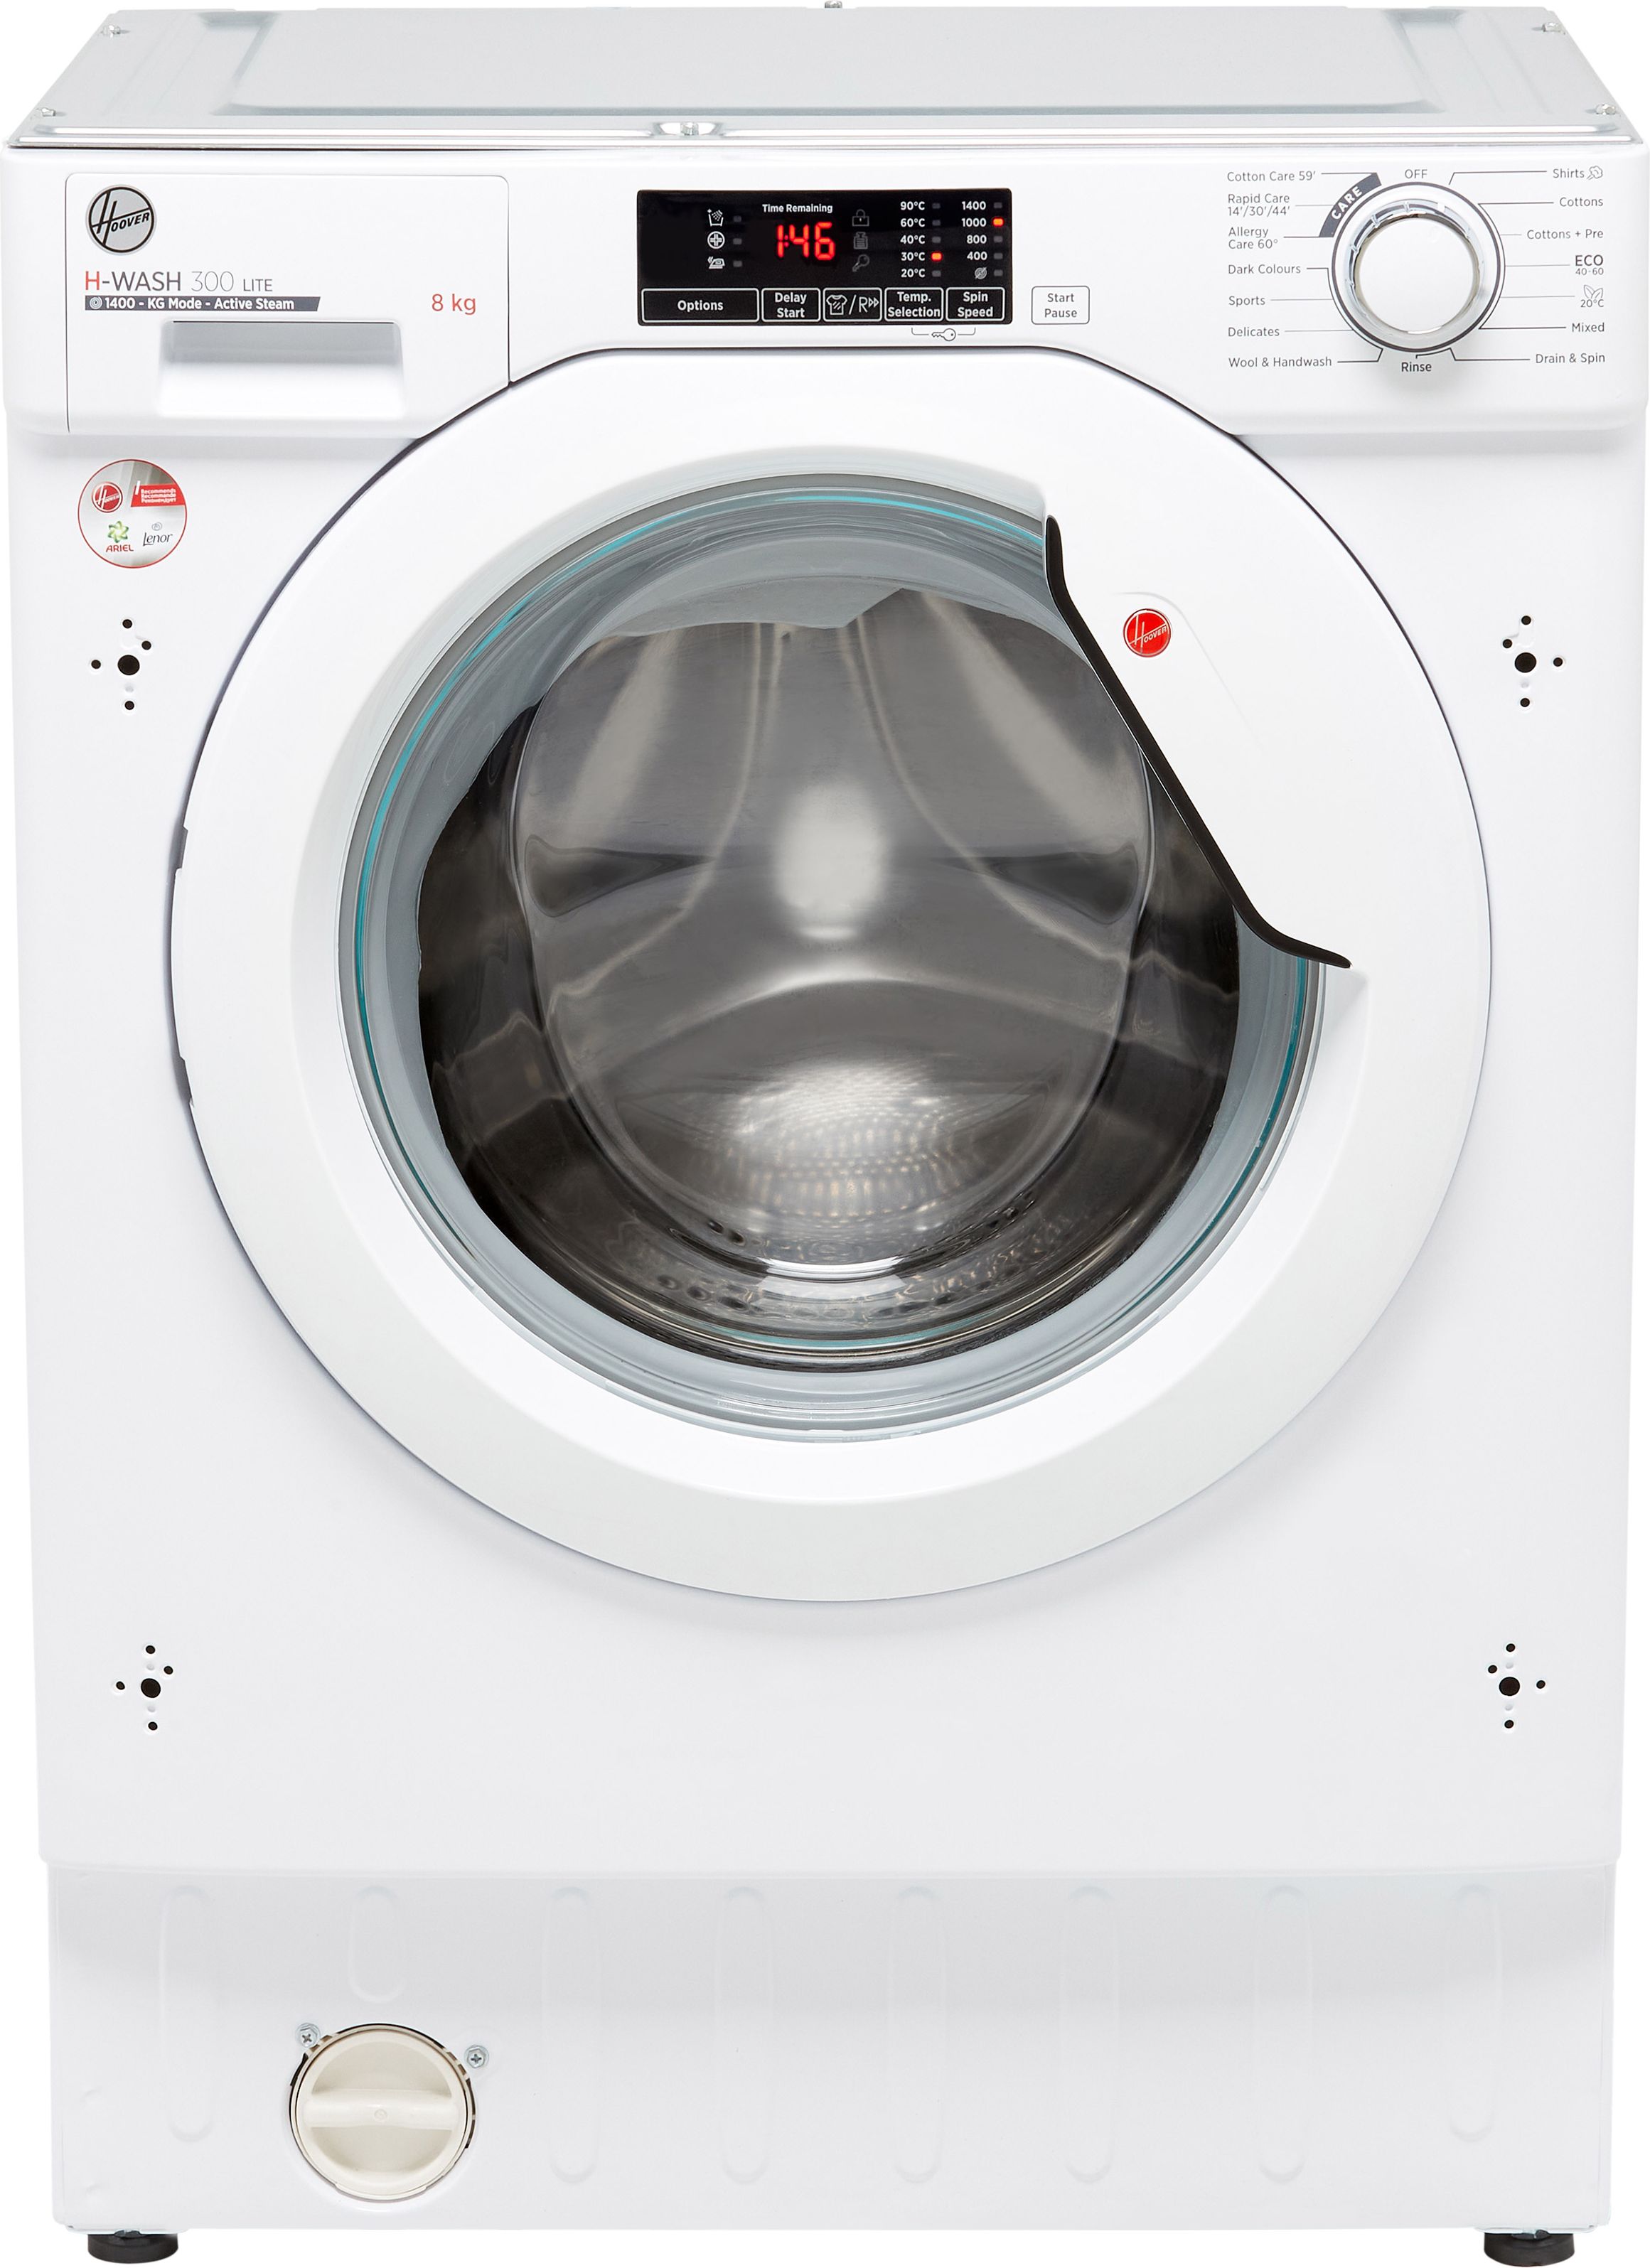 Hoover H-WASH 300 HBWS48D1W4 Integrated 8kg Washing Machine with 1400 rpm - White - B Rated, White